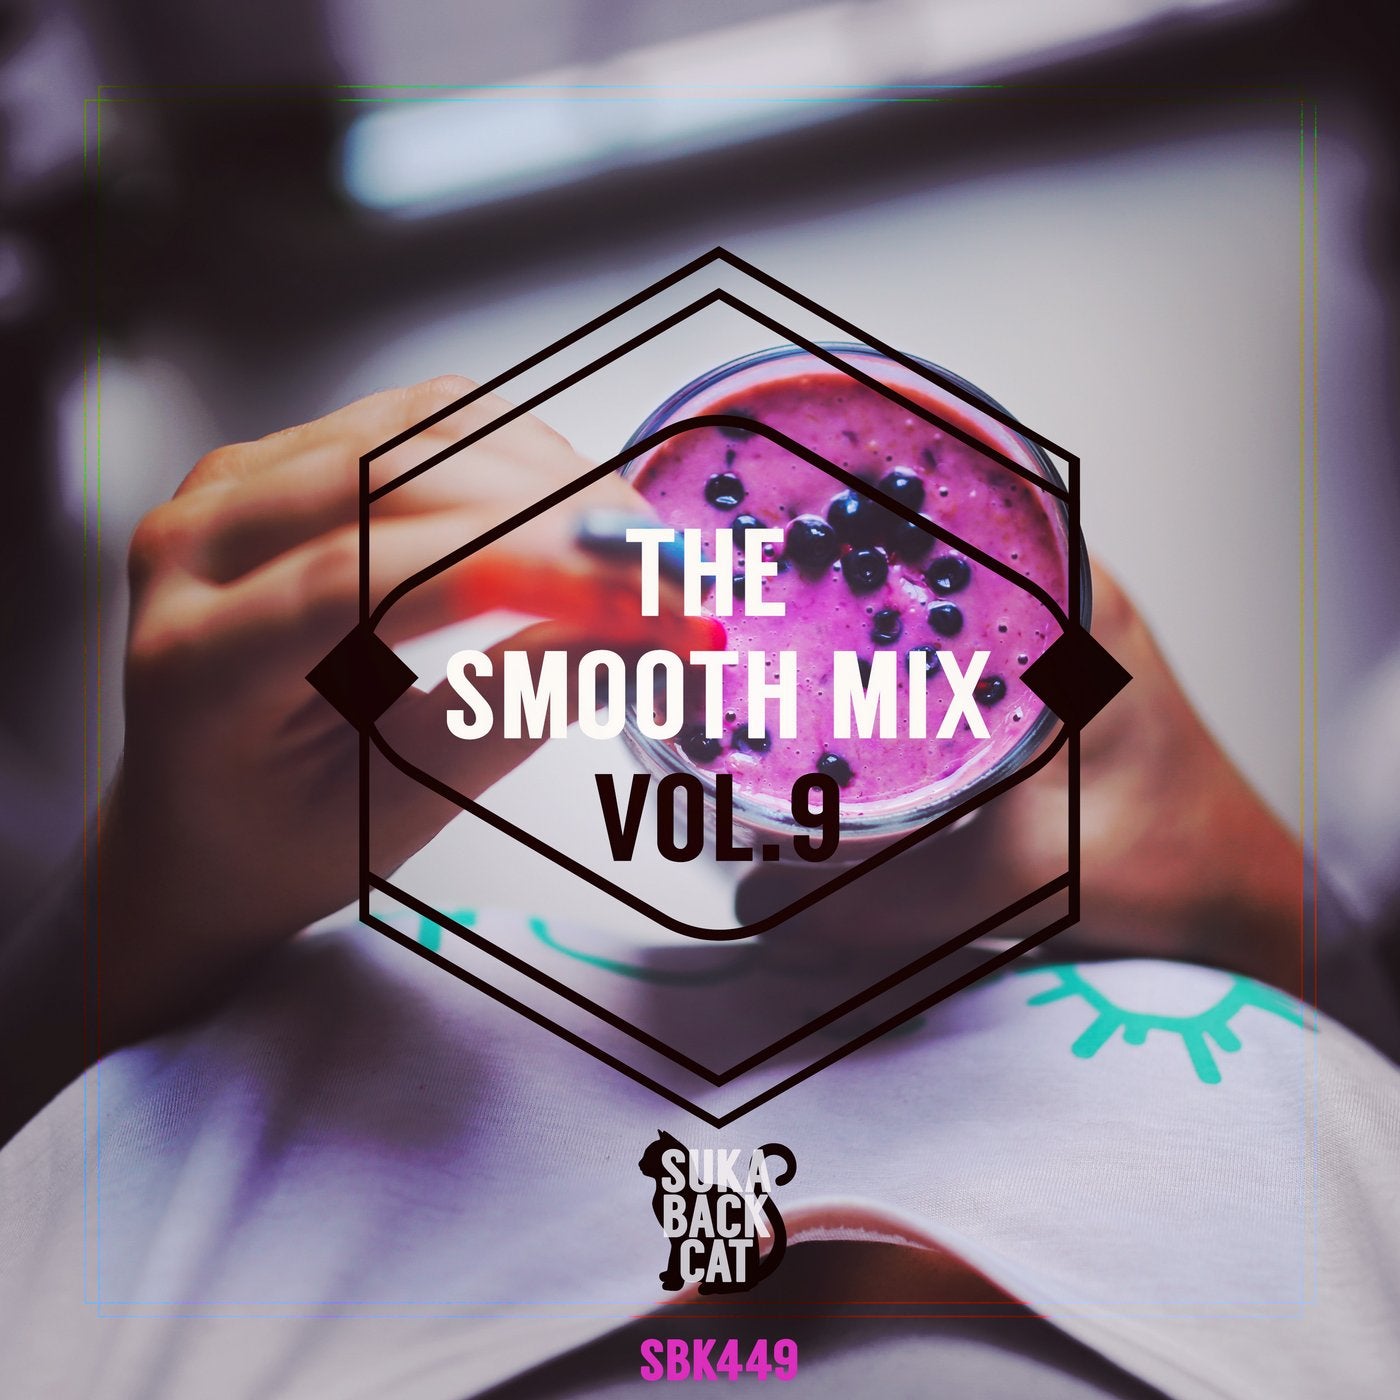 The Smooth Mix, Vol. 9